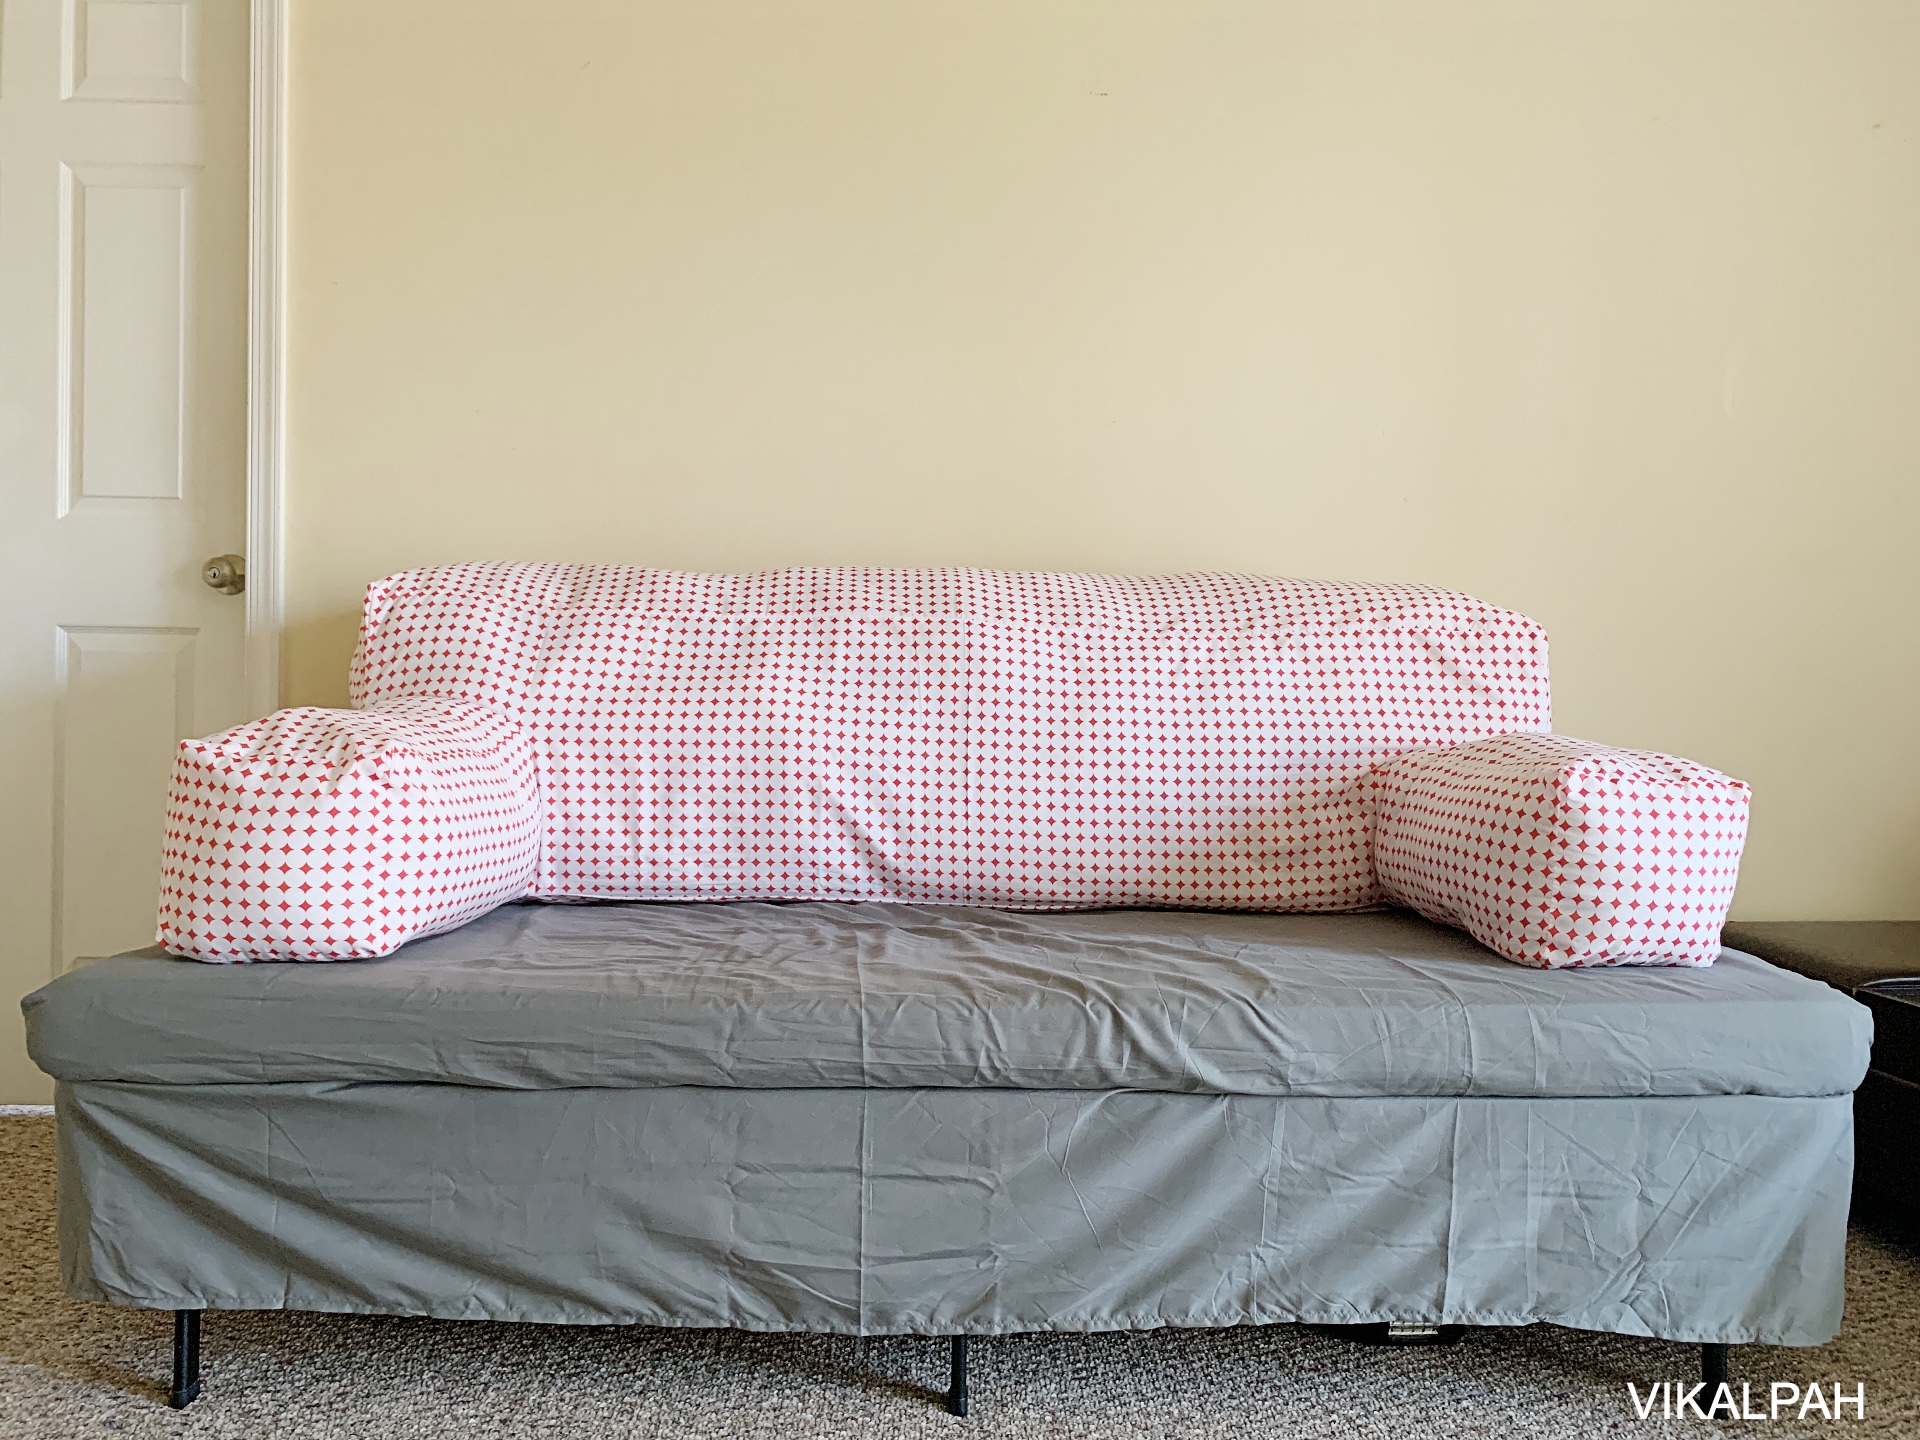 How To Convert A Twin Bed Into Couch, Make Couch Out Of Twin Bed